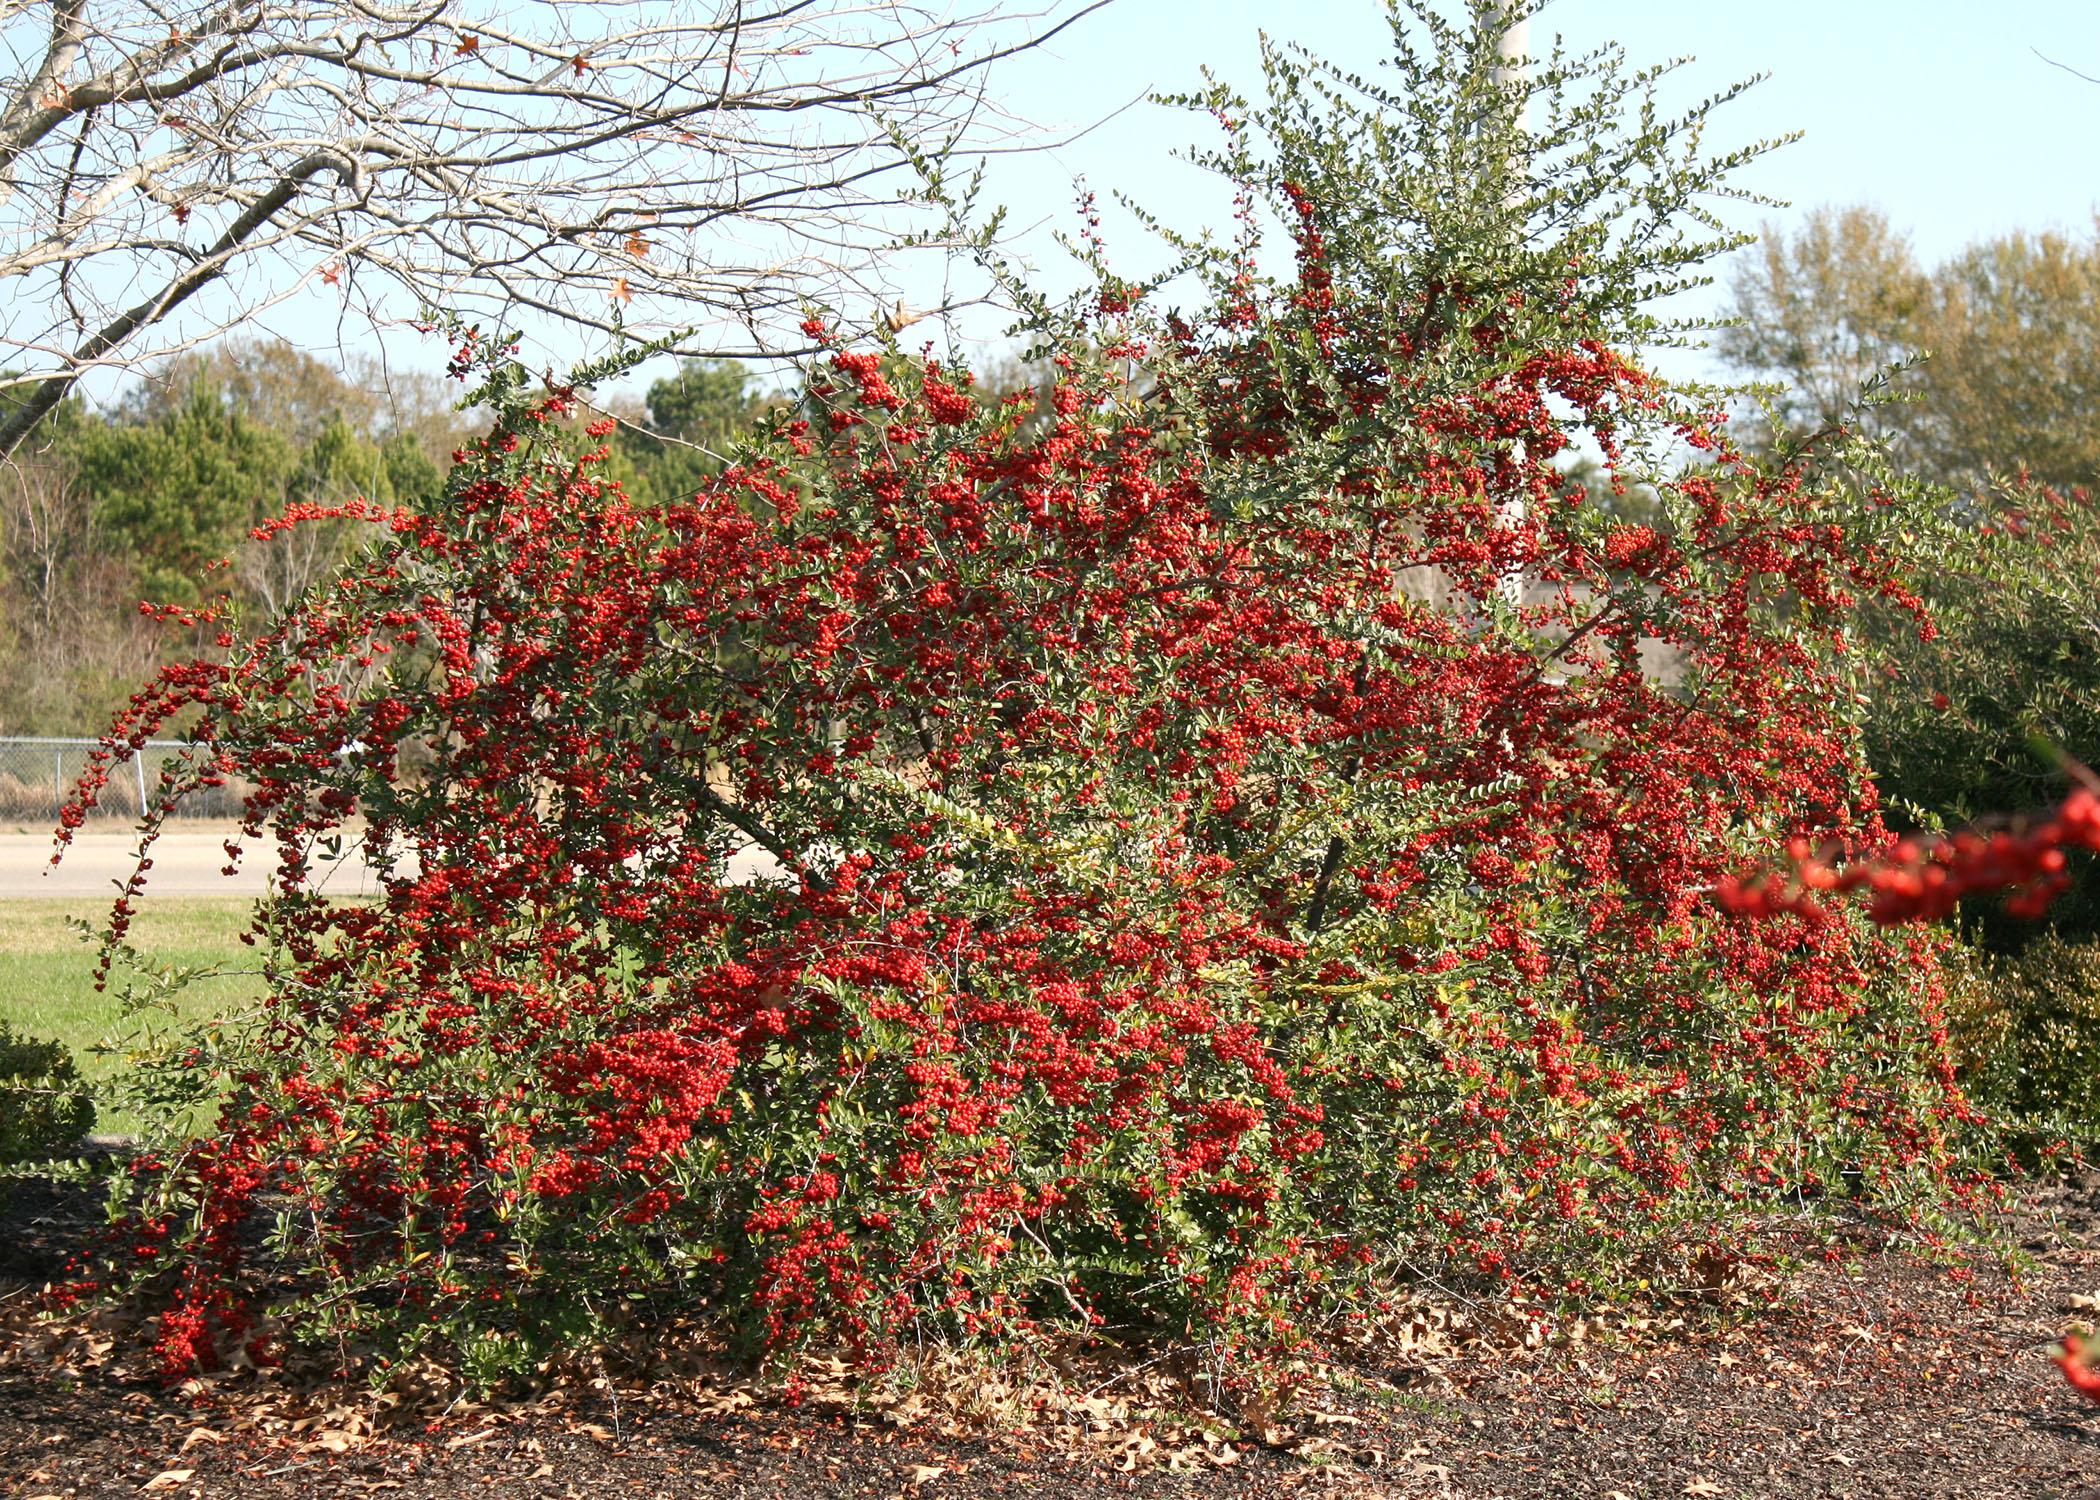 The heavy fruit clusters of Pyracantha seem to drip off the branches, adding beauty and interest to any winter landscape. (Photo by MSU Extension Service/Gary Bachman)